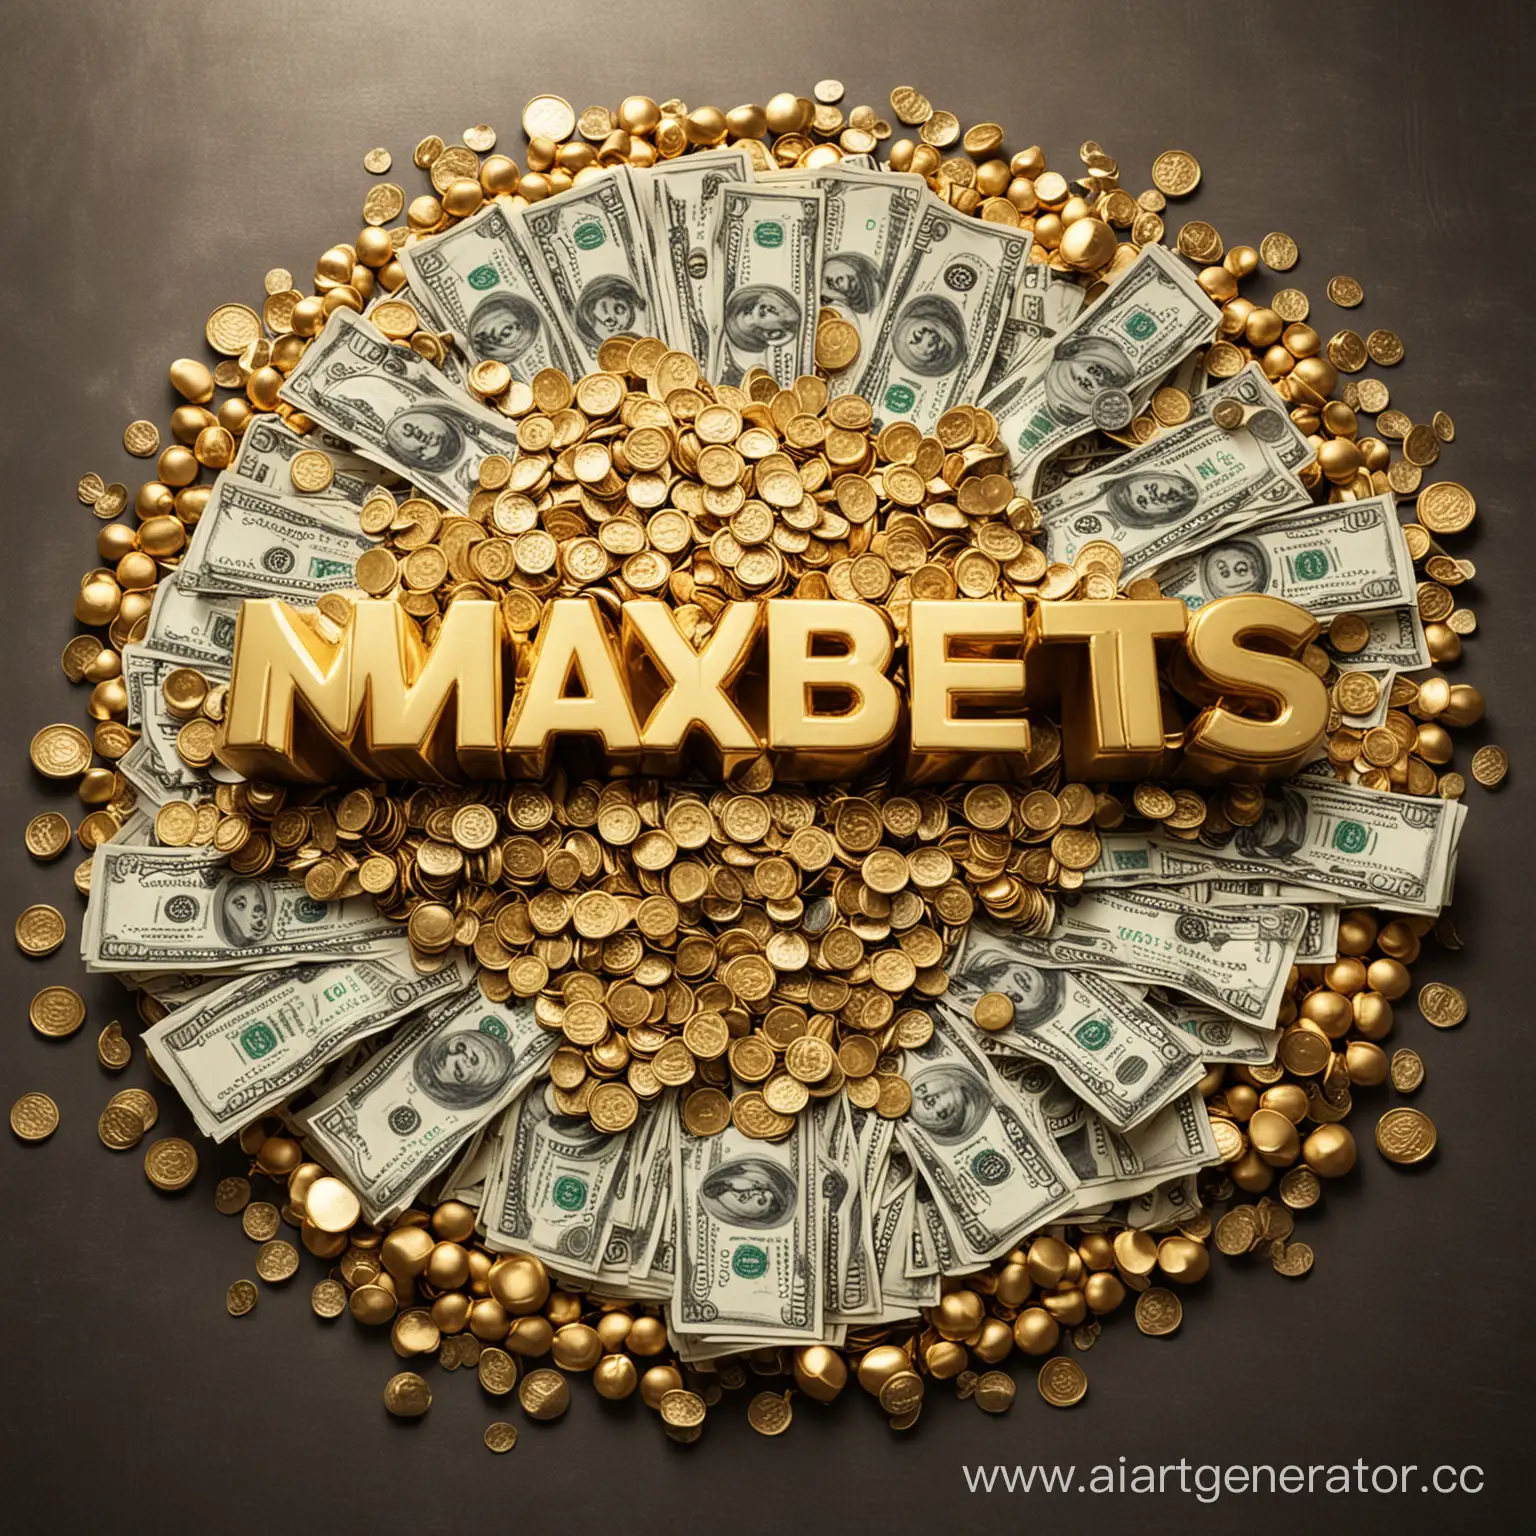 Luxurious-Display-of-Gold-and-Money-with-Maxbets-Centerpiece